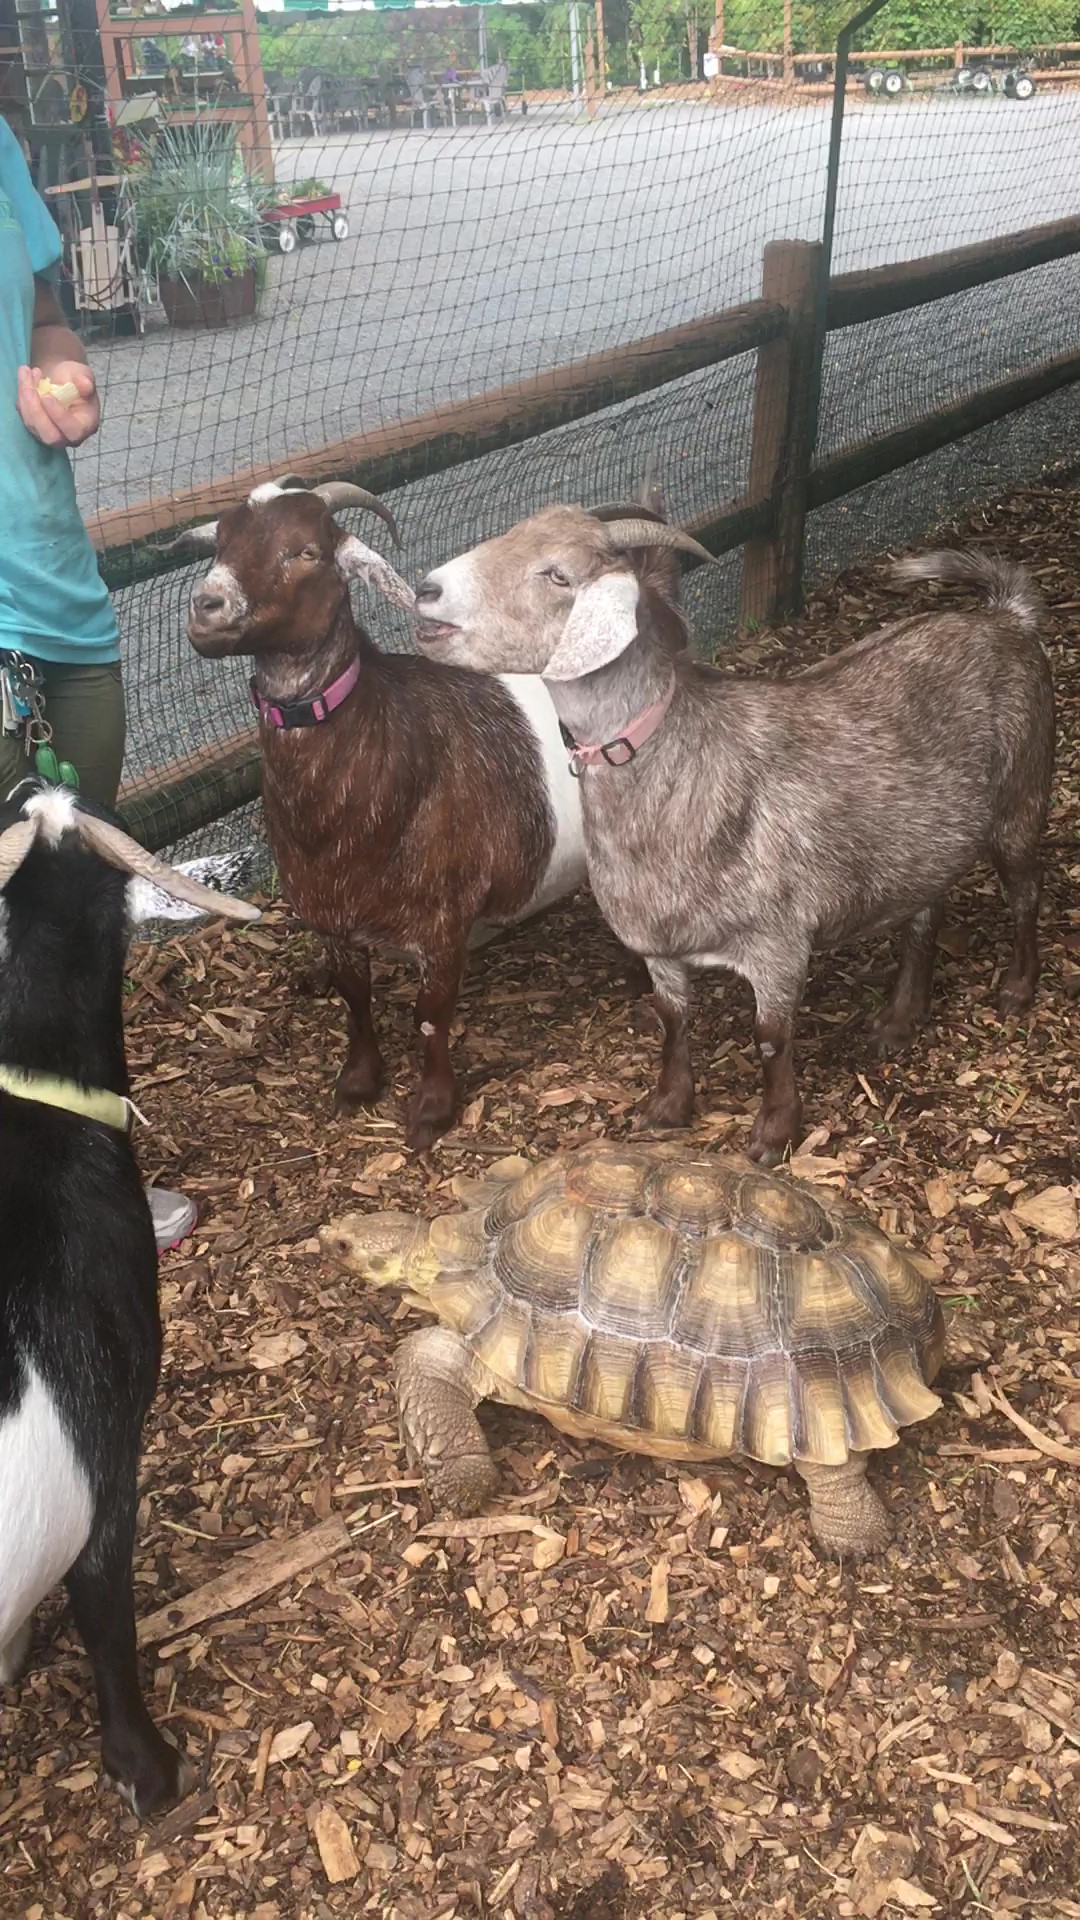 Goats and a tortoise